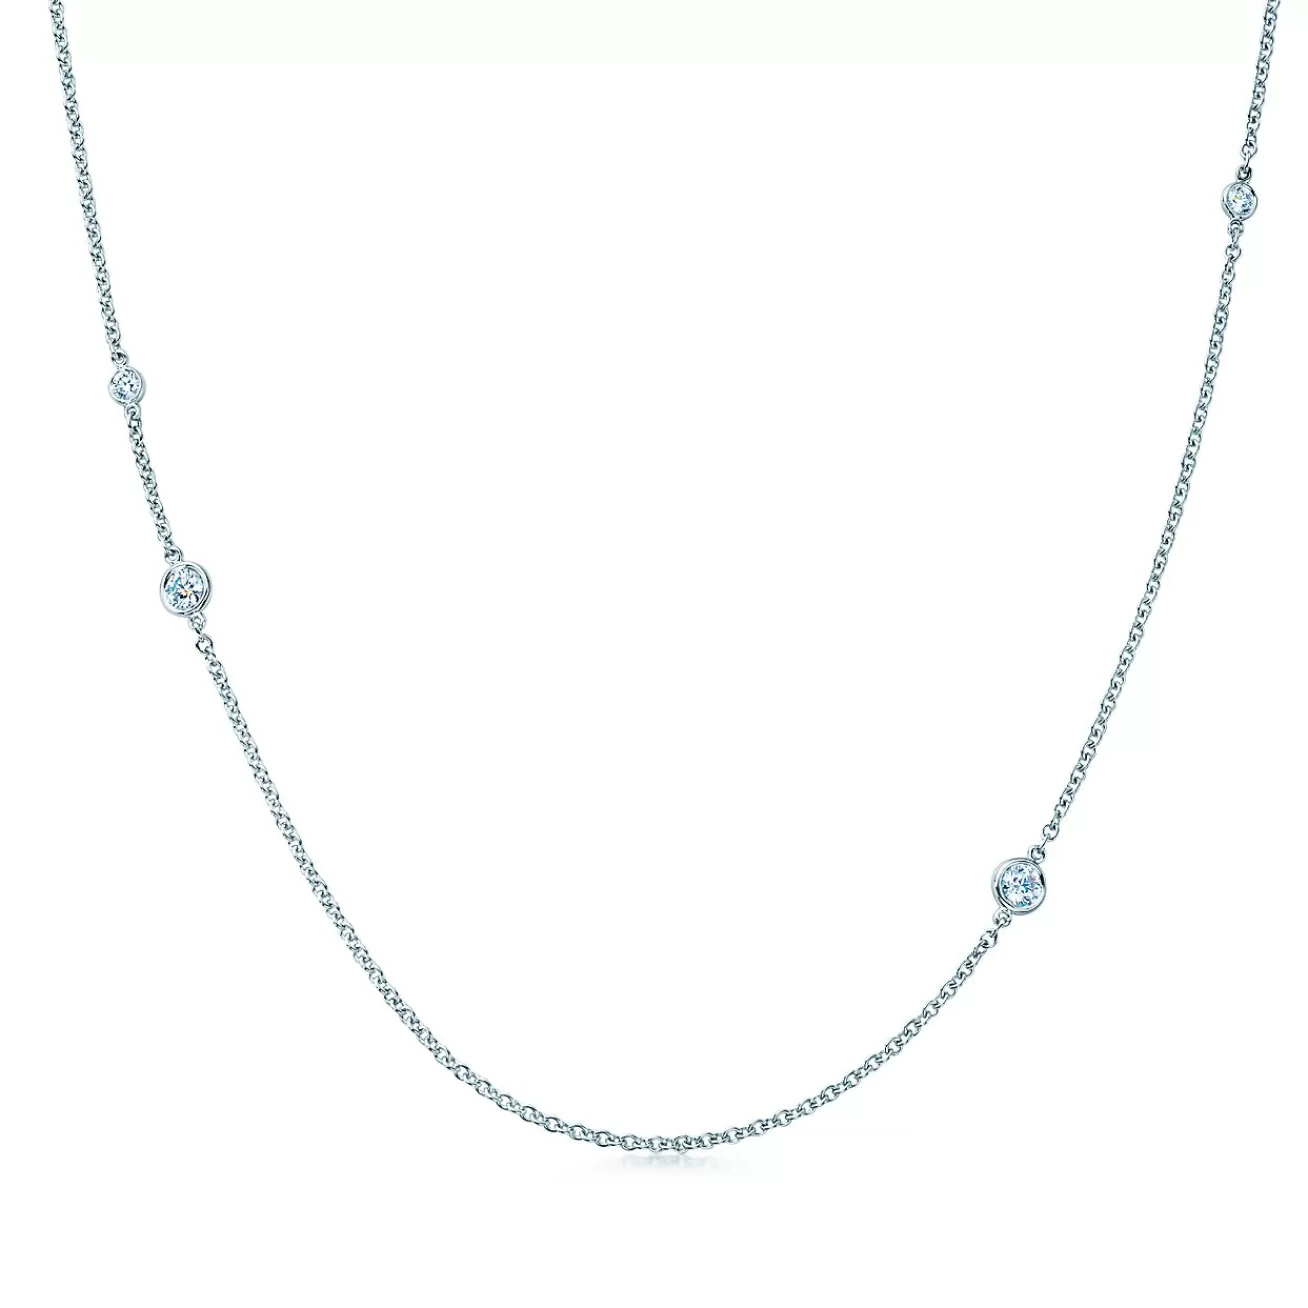 Tiffany & Co. Elsa Peretti® Diamonds by the Yard® sprinkle necklace in platinum. | ^ Necklaces & Pendants | Dainty Jewelry